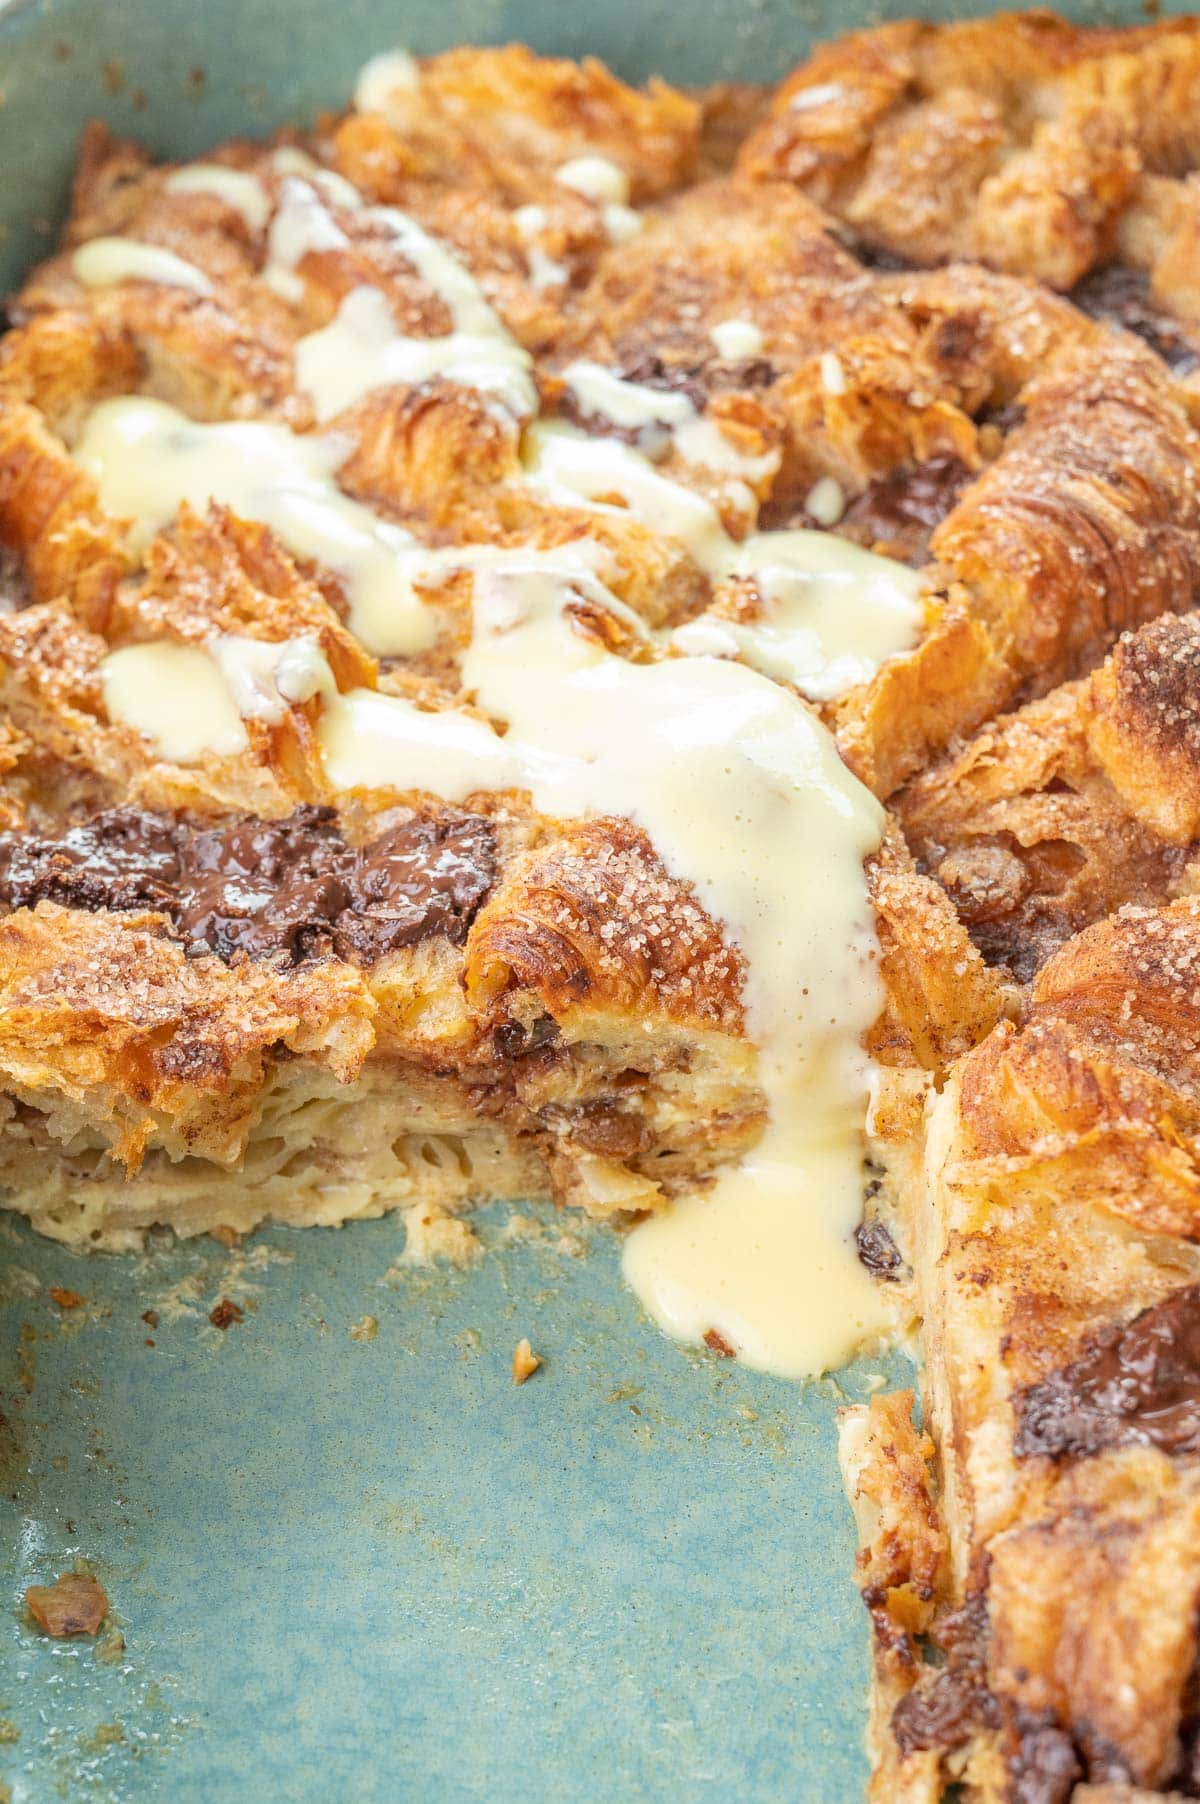 Croissant bread pudding in a baking dish with a piece missing, drizzled with vanilla sauce.